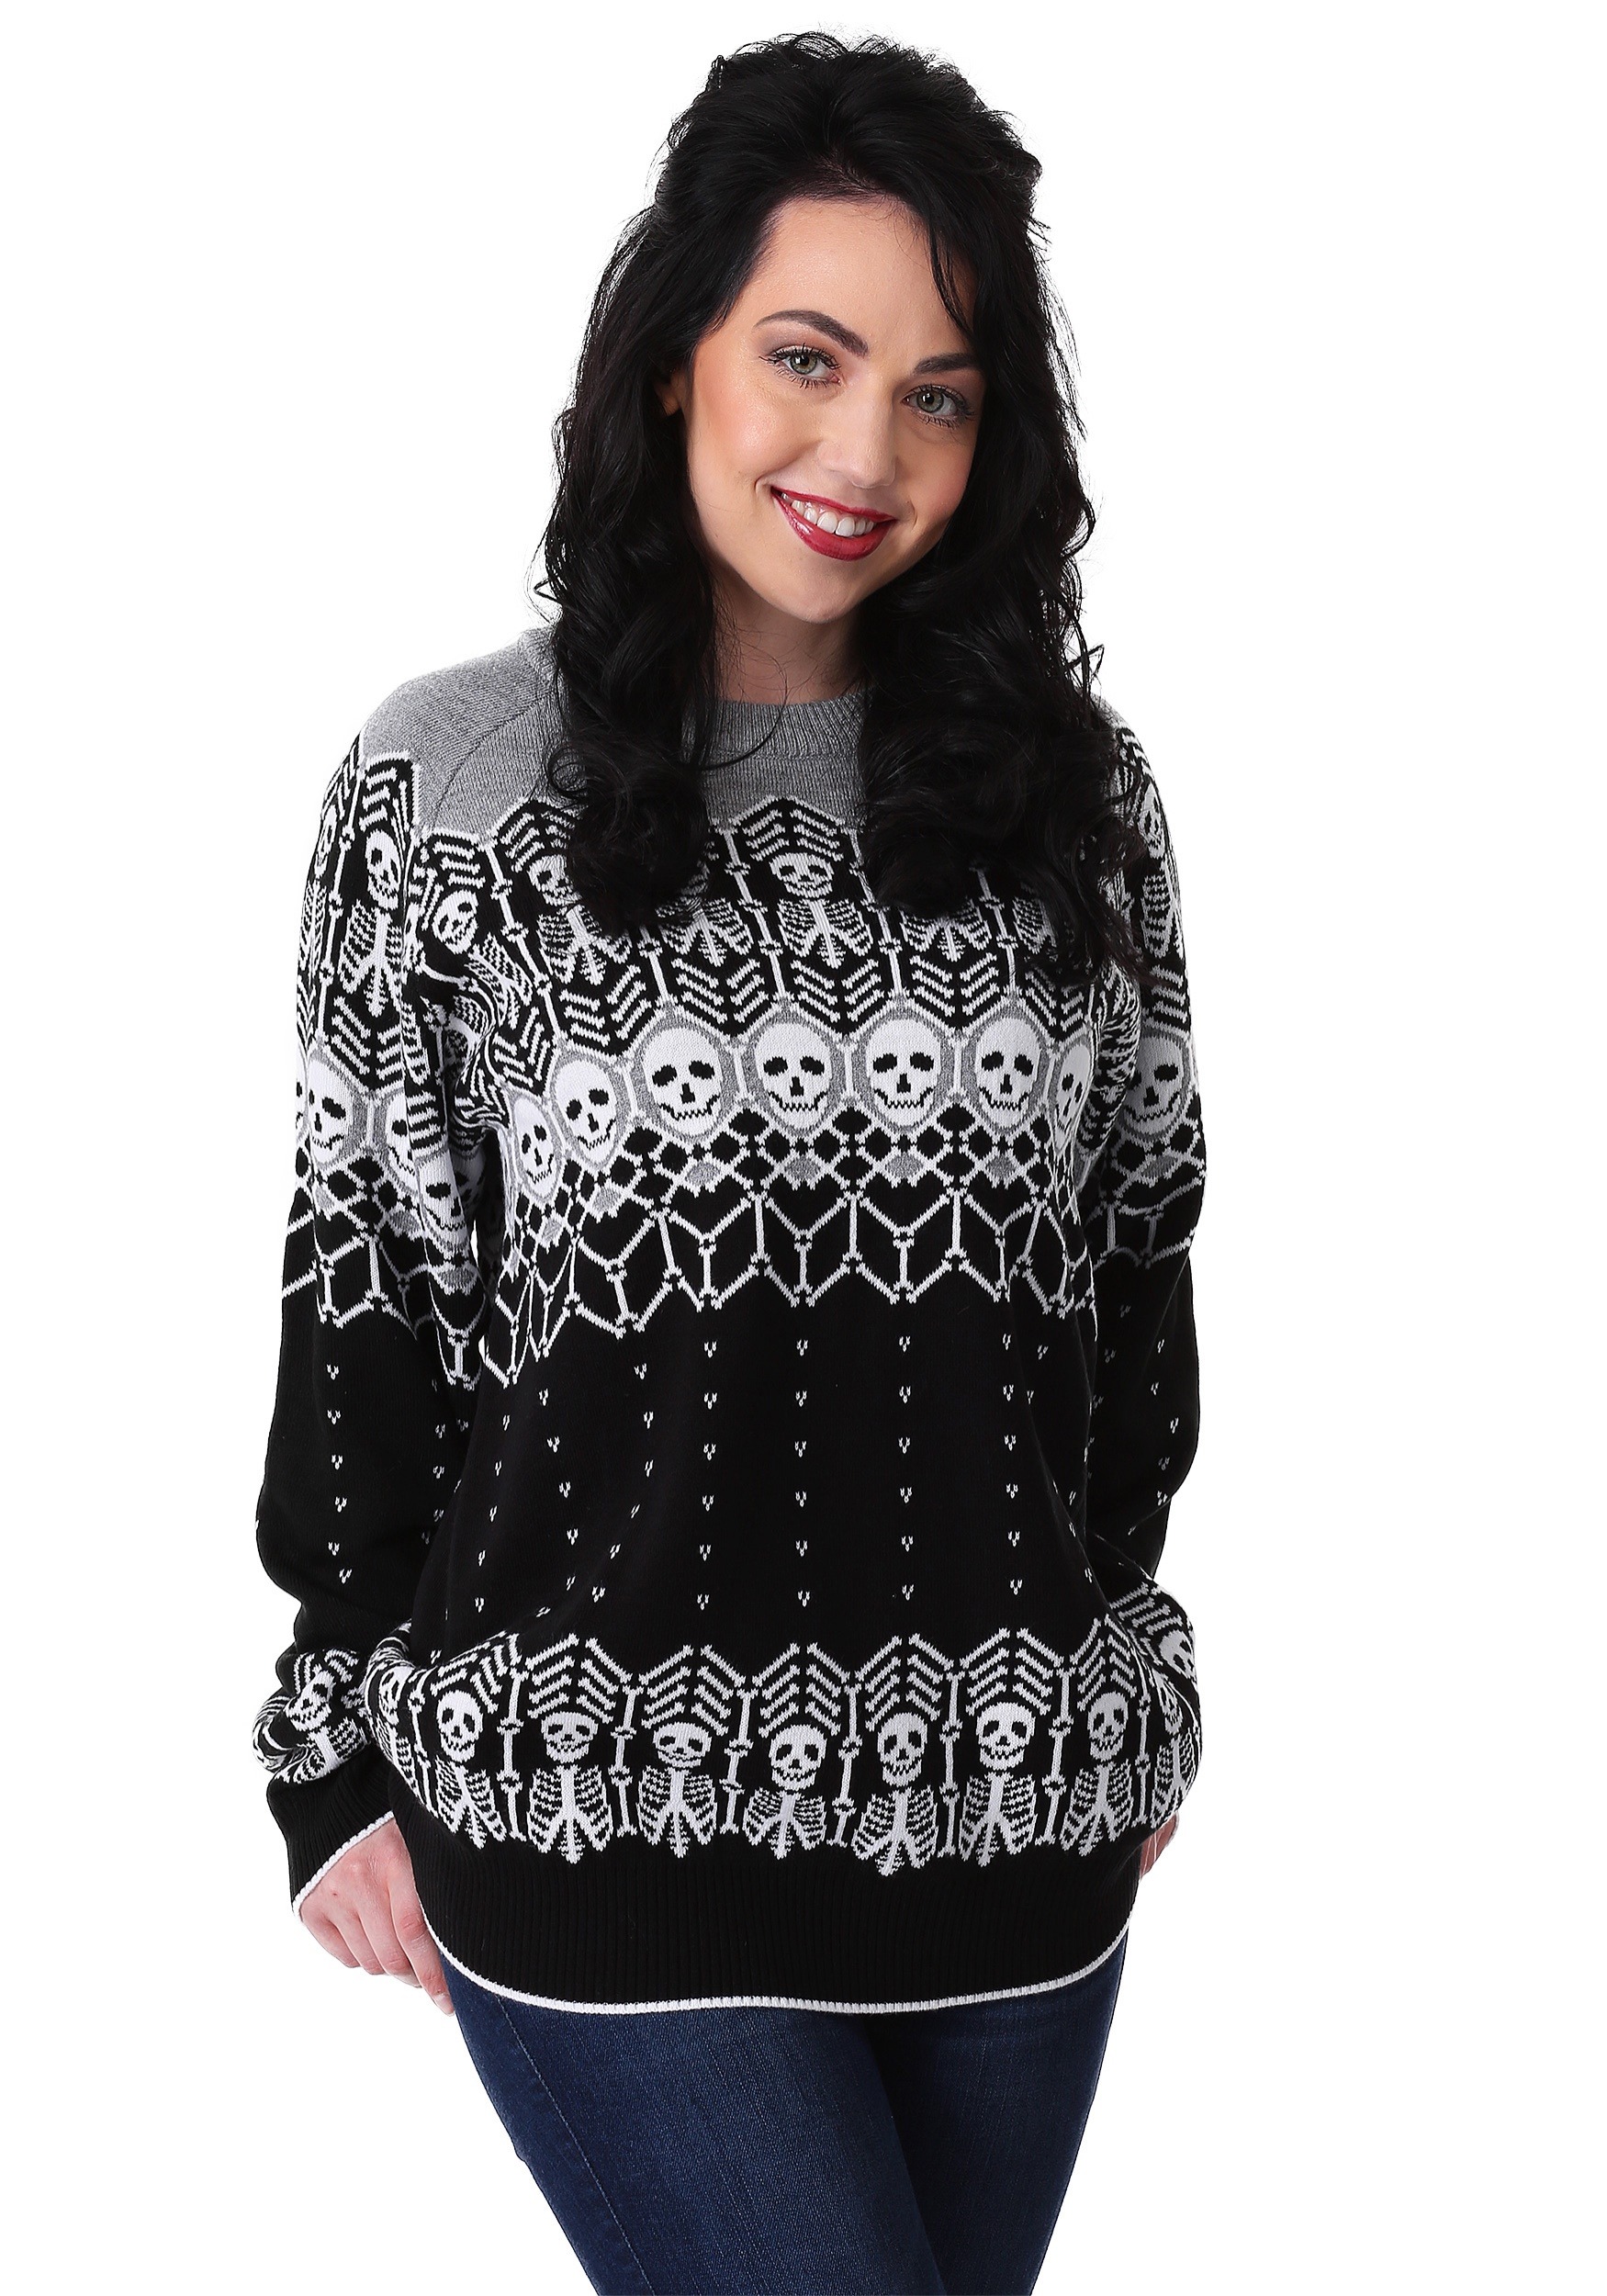 Black and White Skeleton Adult Halloween Sweater